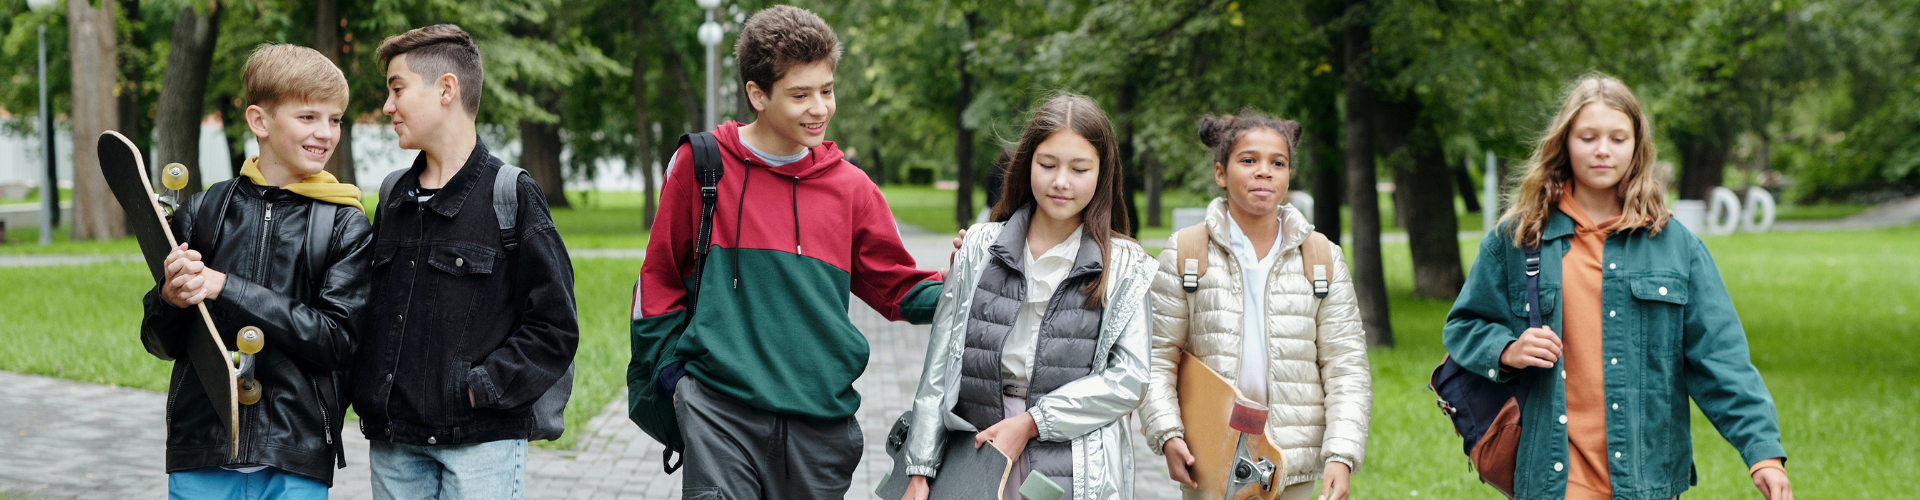 Image of a group of teenagers walking